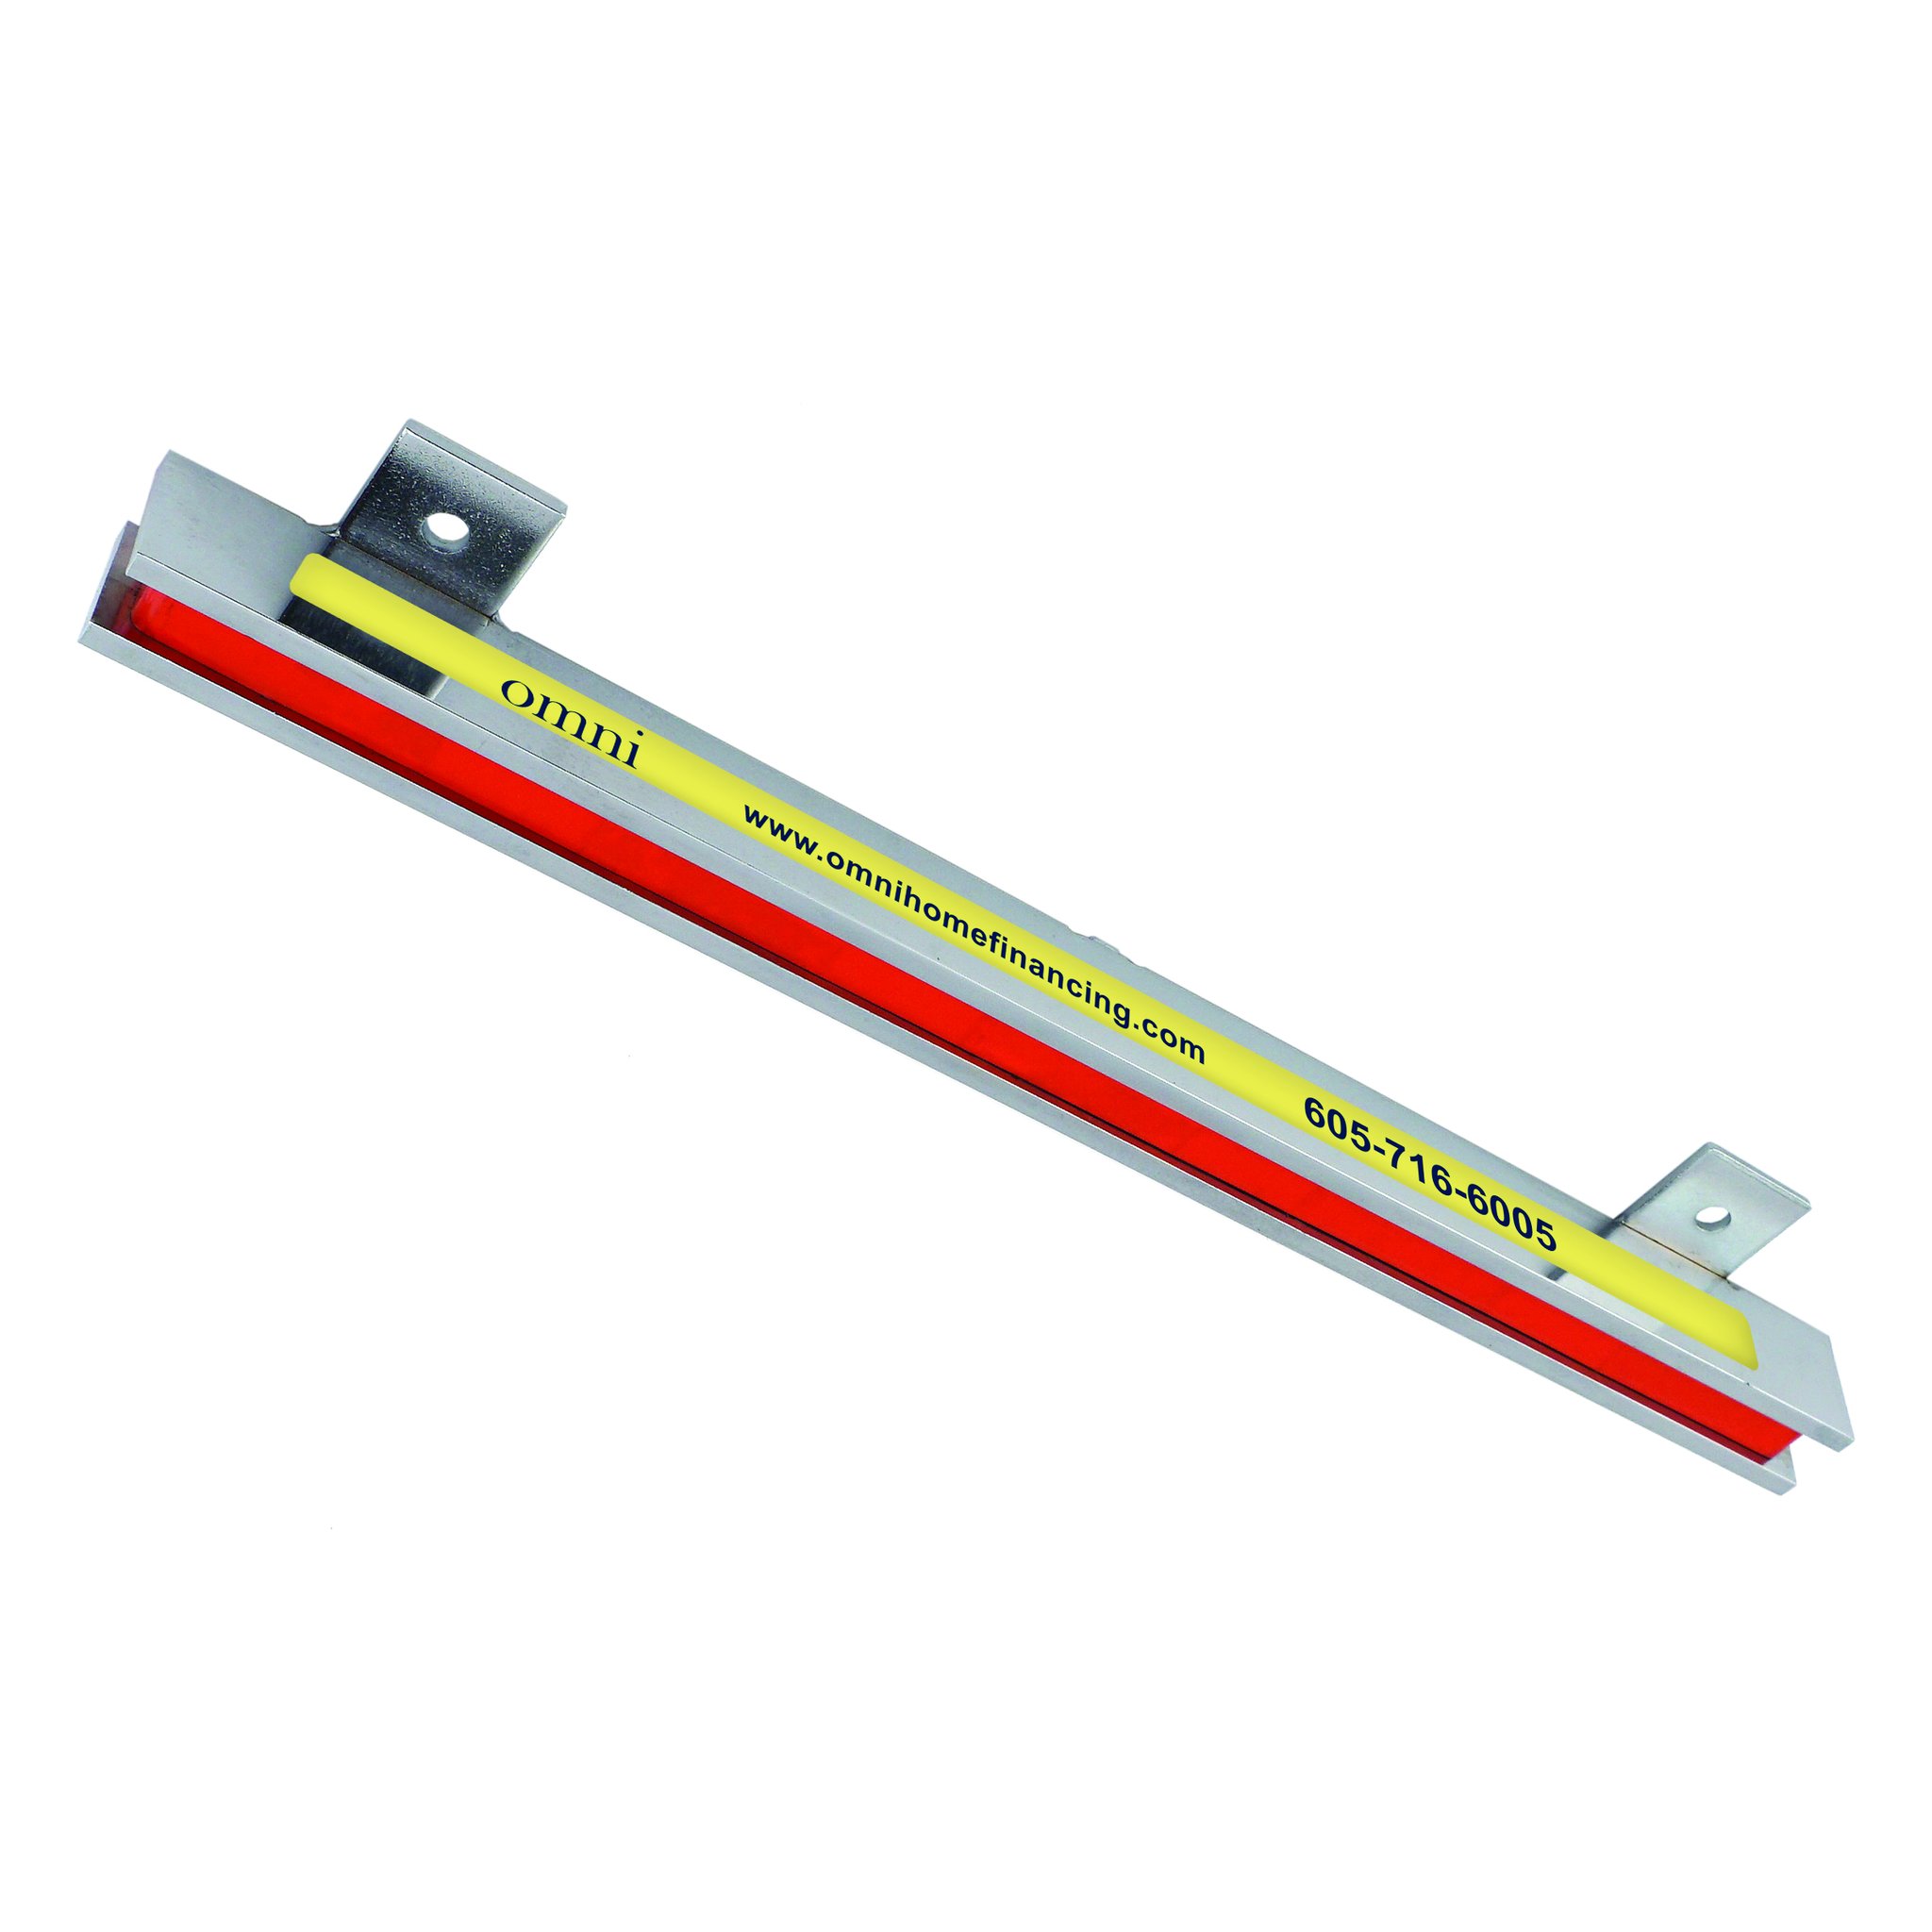 Magnet Source 07664 Tool Bar, Magnetic, Ceramic/Steel, Red/Silver, Stainless Steel - 5